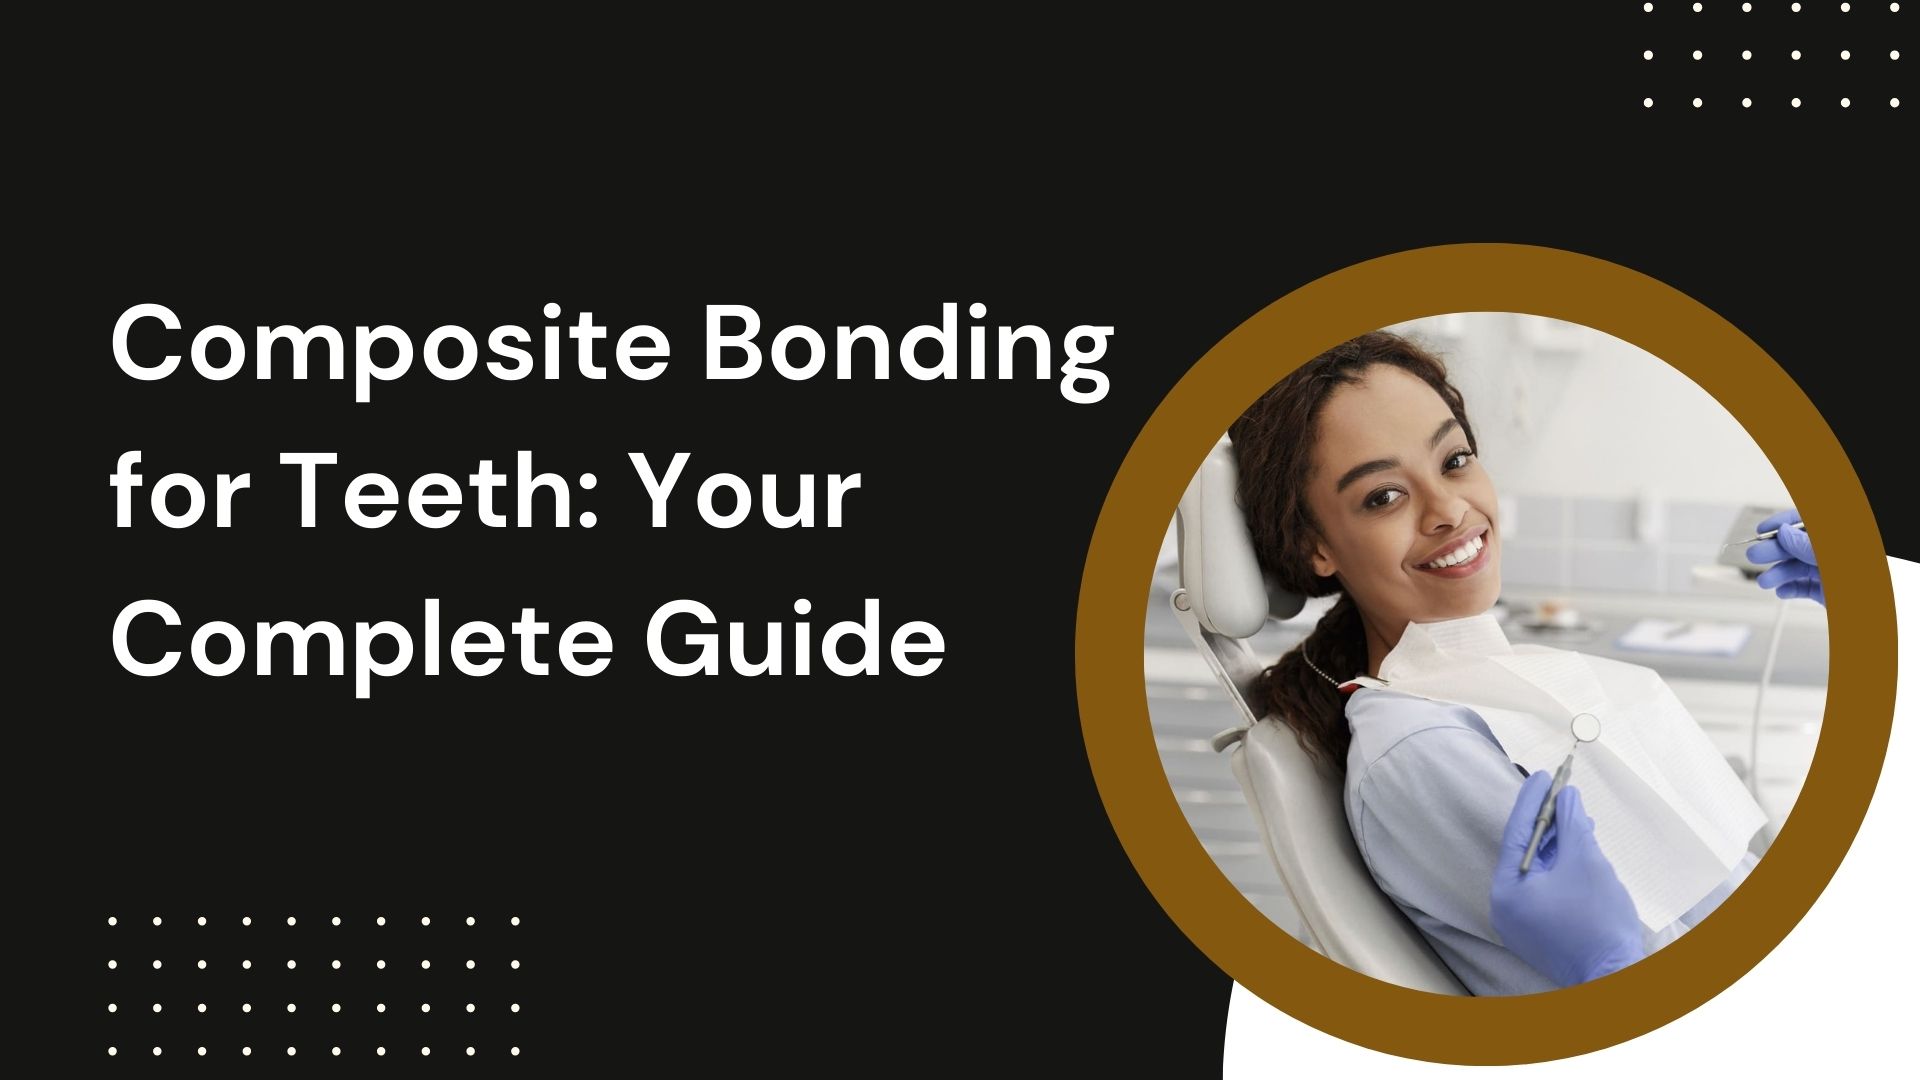 Composite Bonding for Teeth: Your Complete Guide